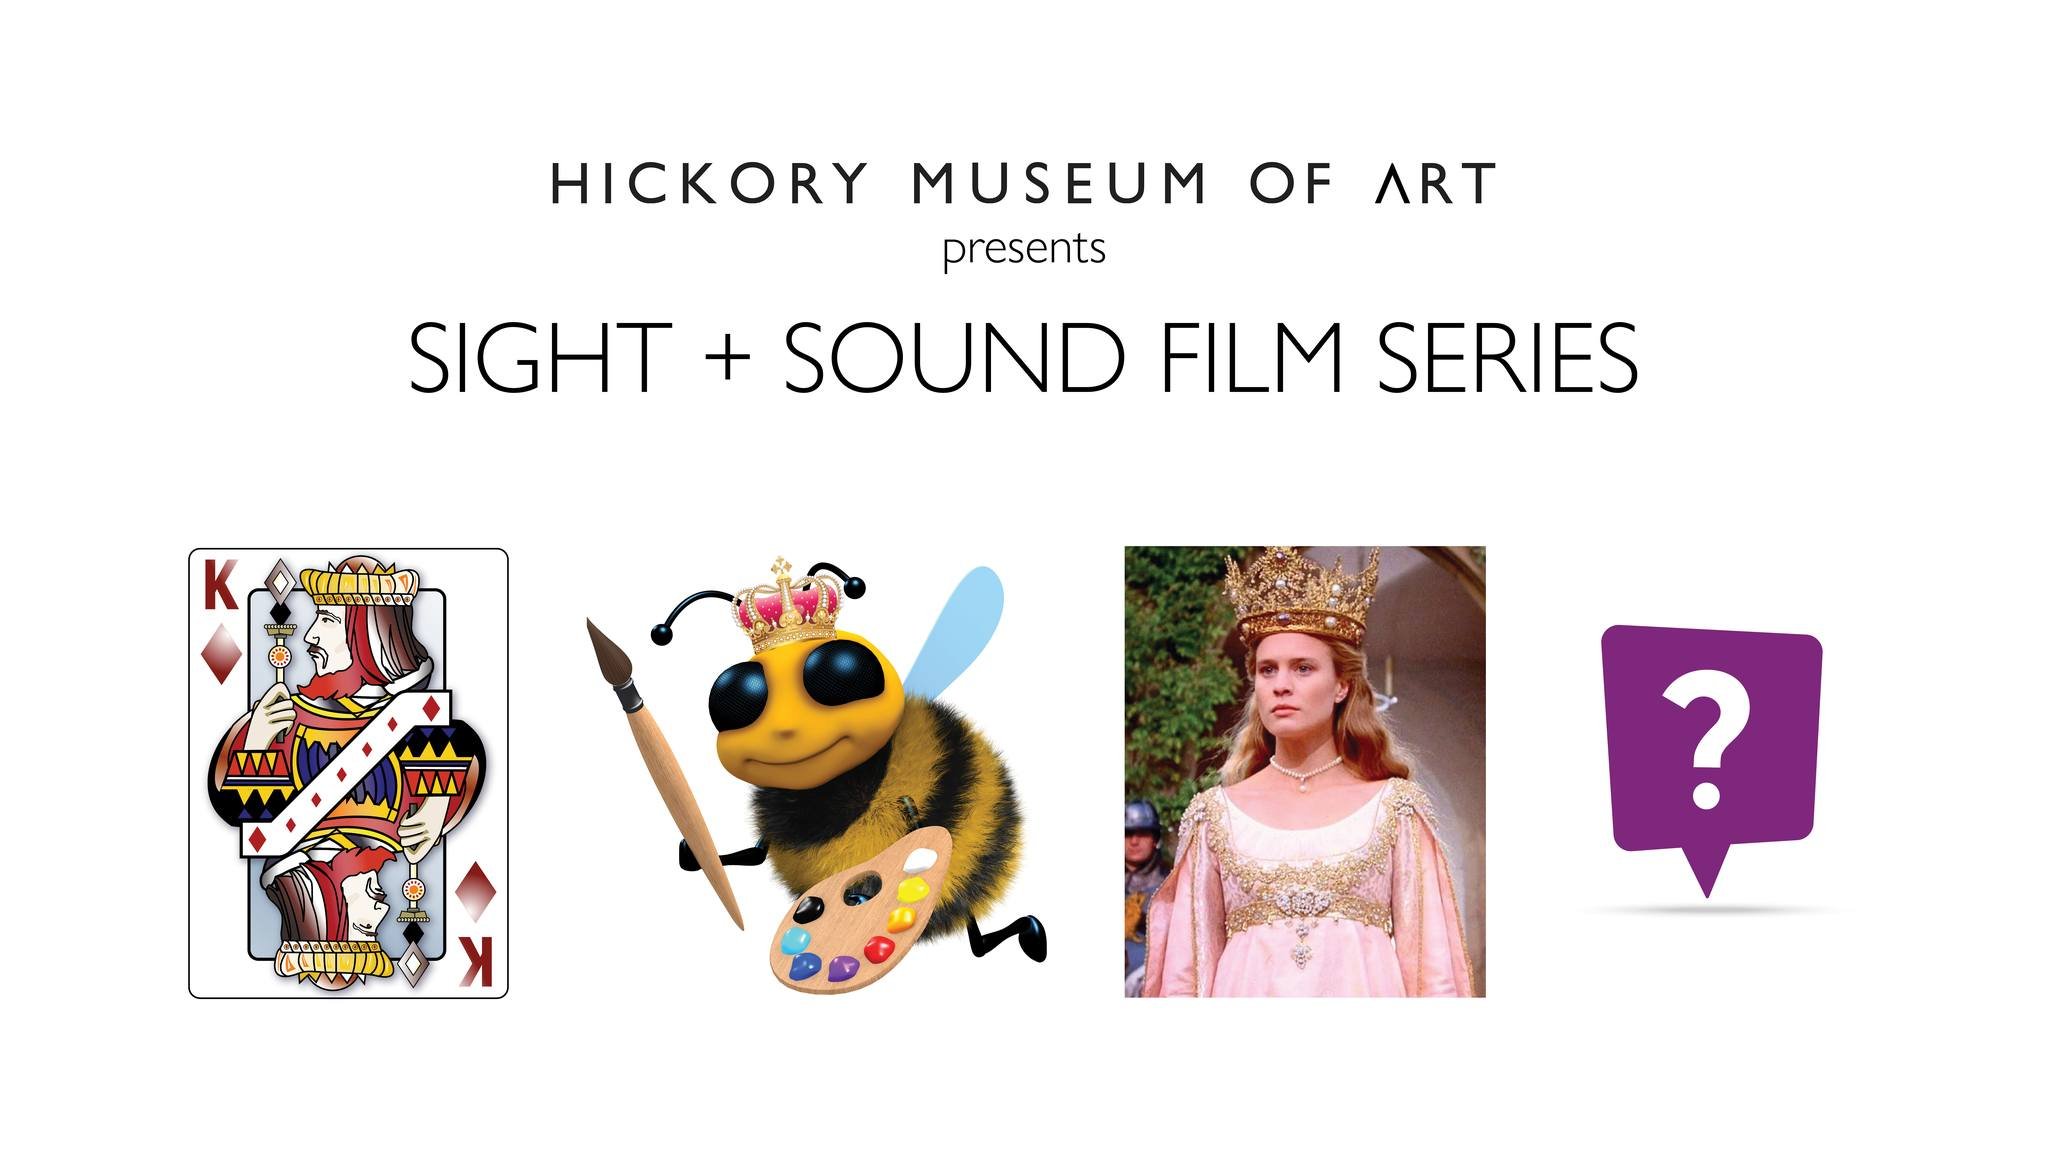 The HMA Sight + Sound Series is two weeks away! While licensing prevents revealing details, we're hinting at the featured rock legend and songs through puzzles. Spot the missing royal in the image, comment your guess, and you could win big!

#hma #hi